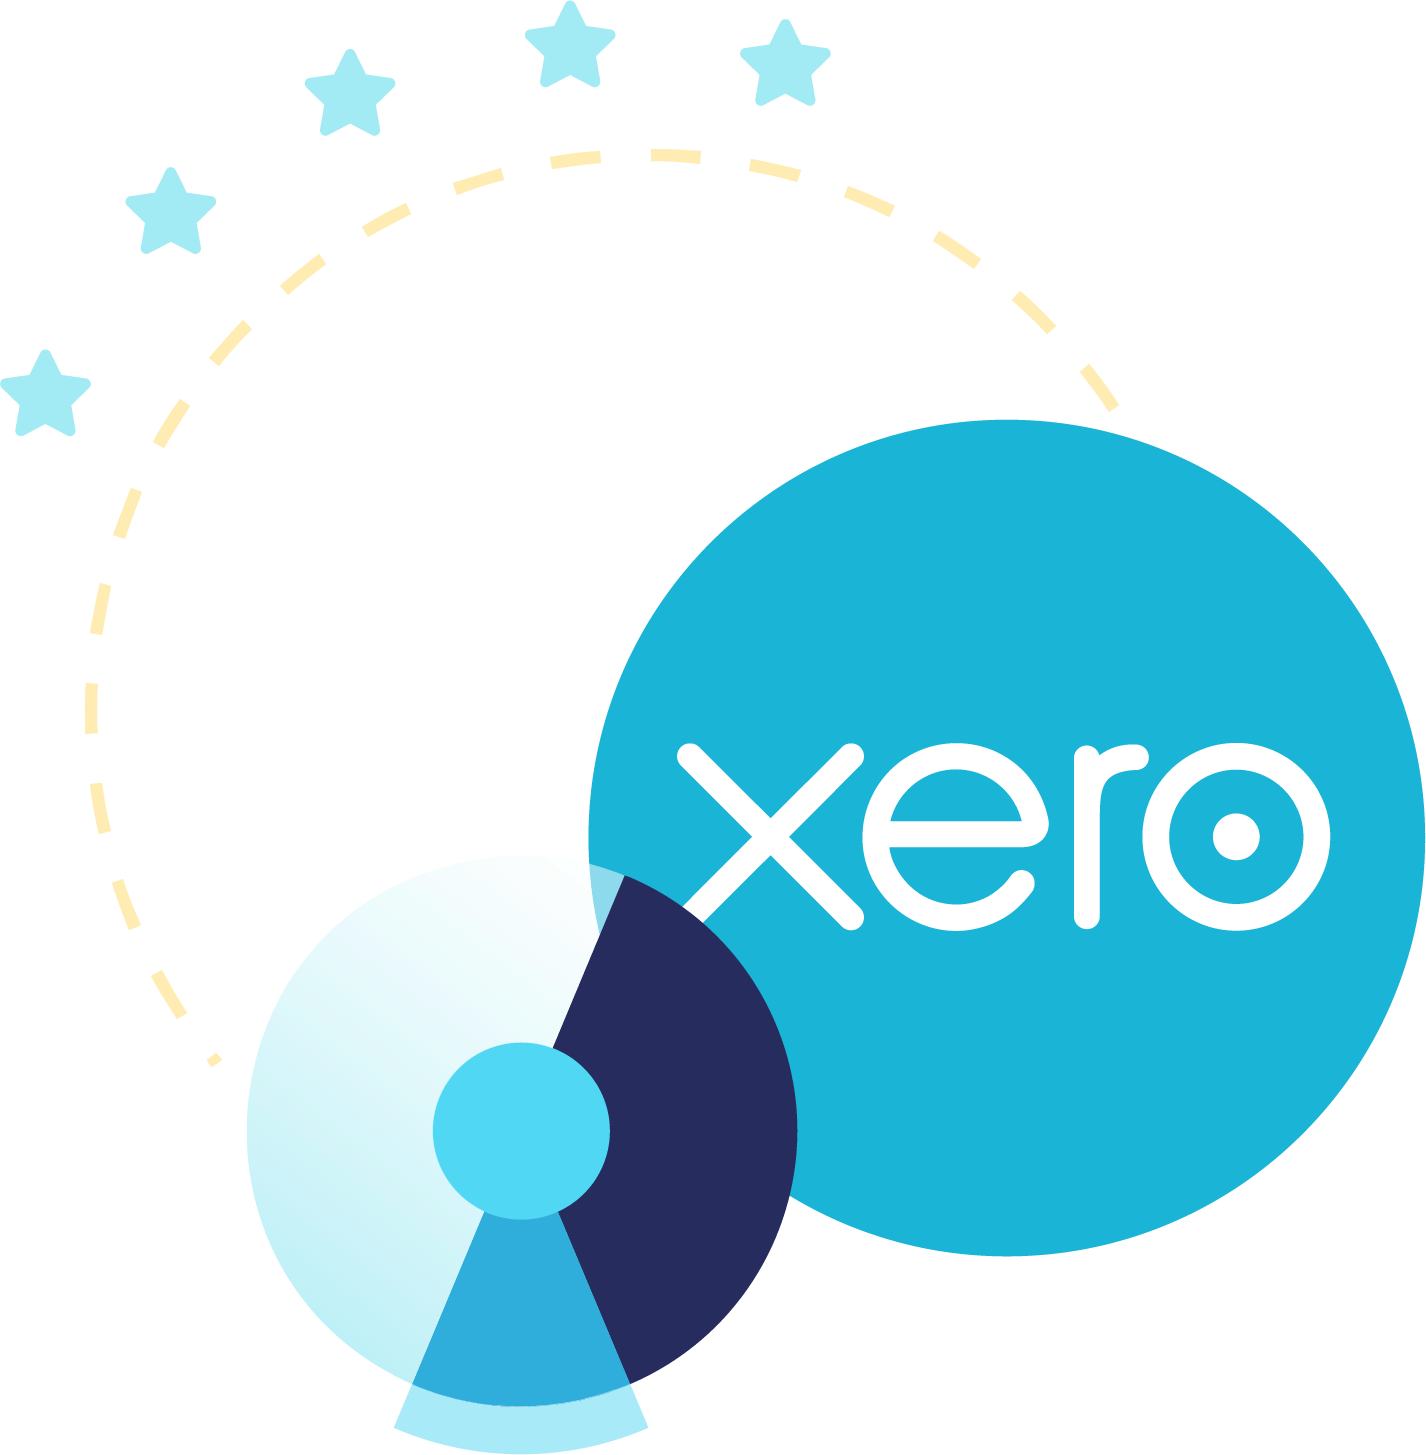 DiviPay is a Xero integrated app